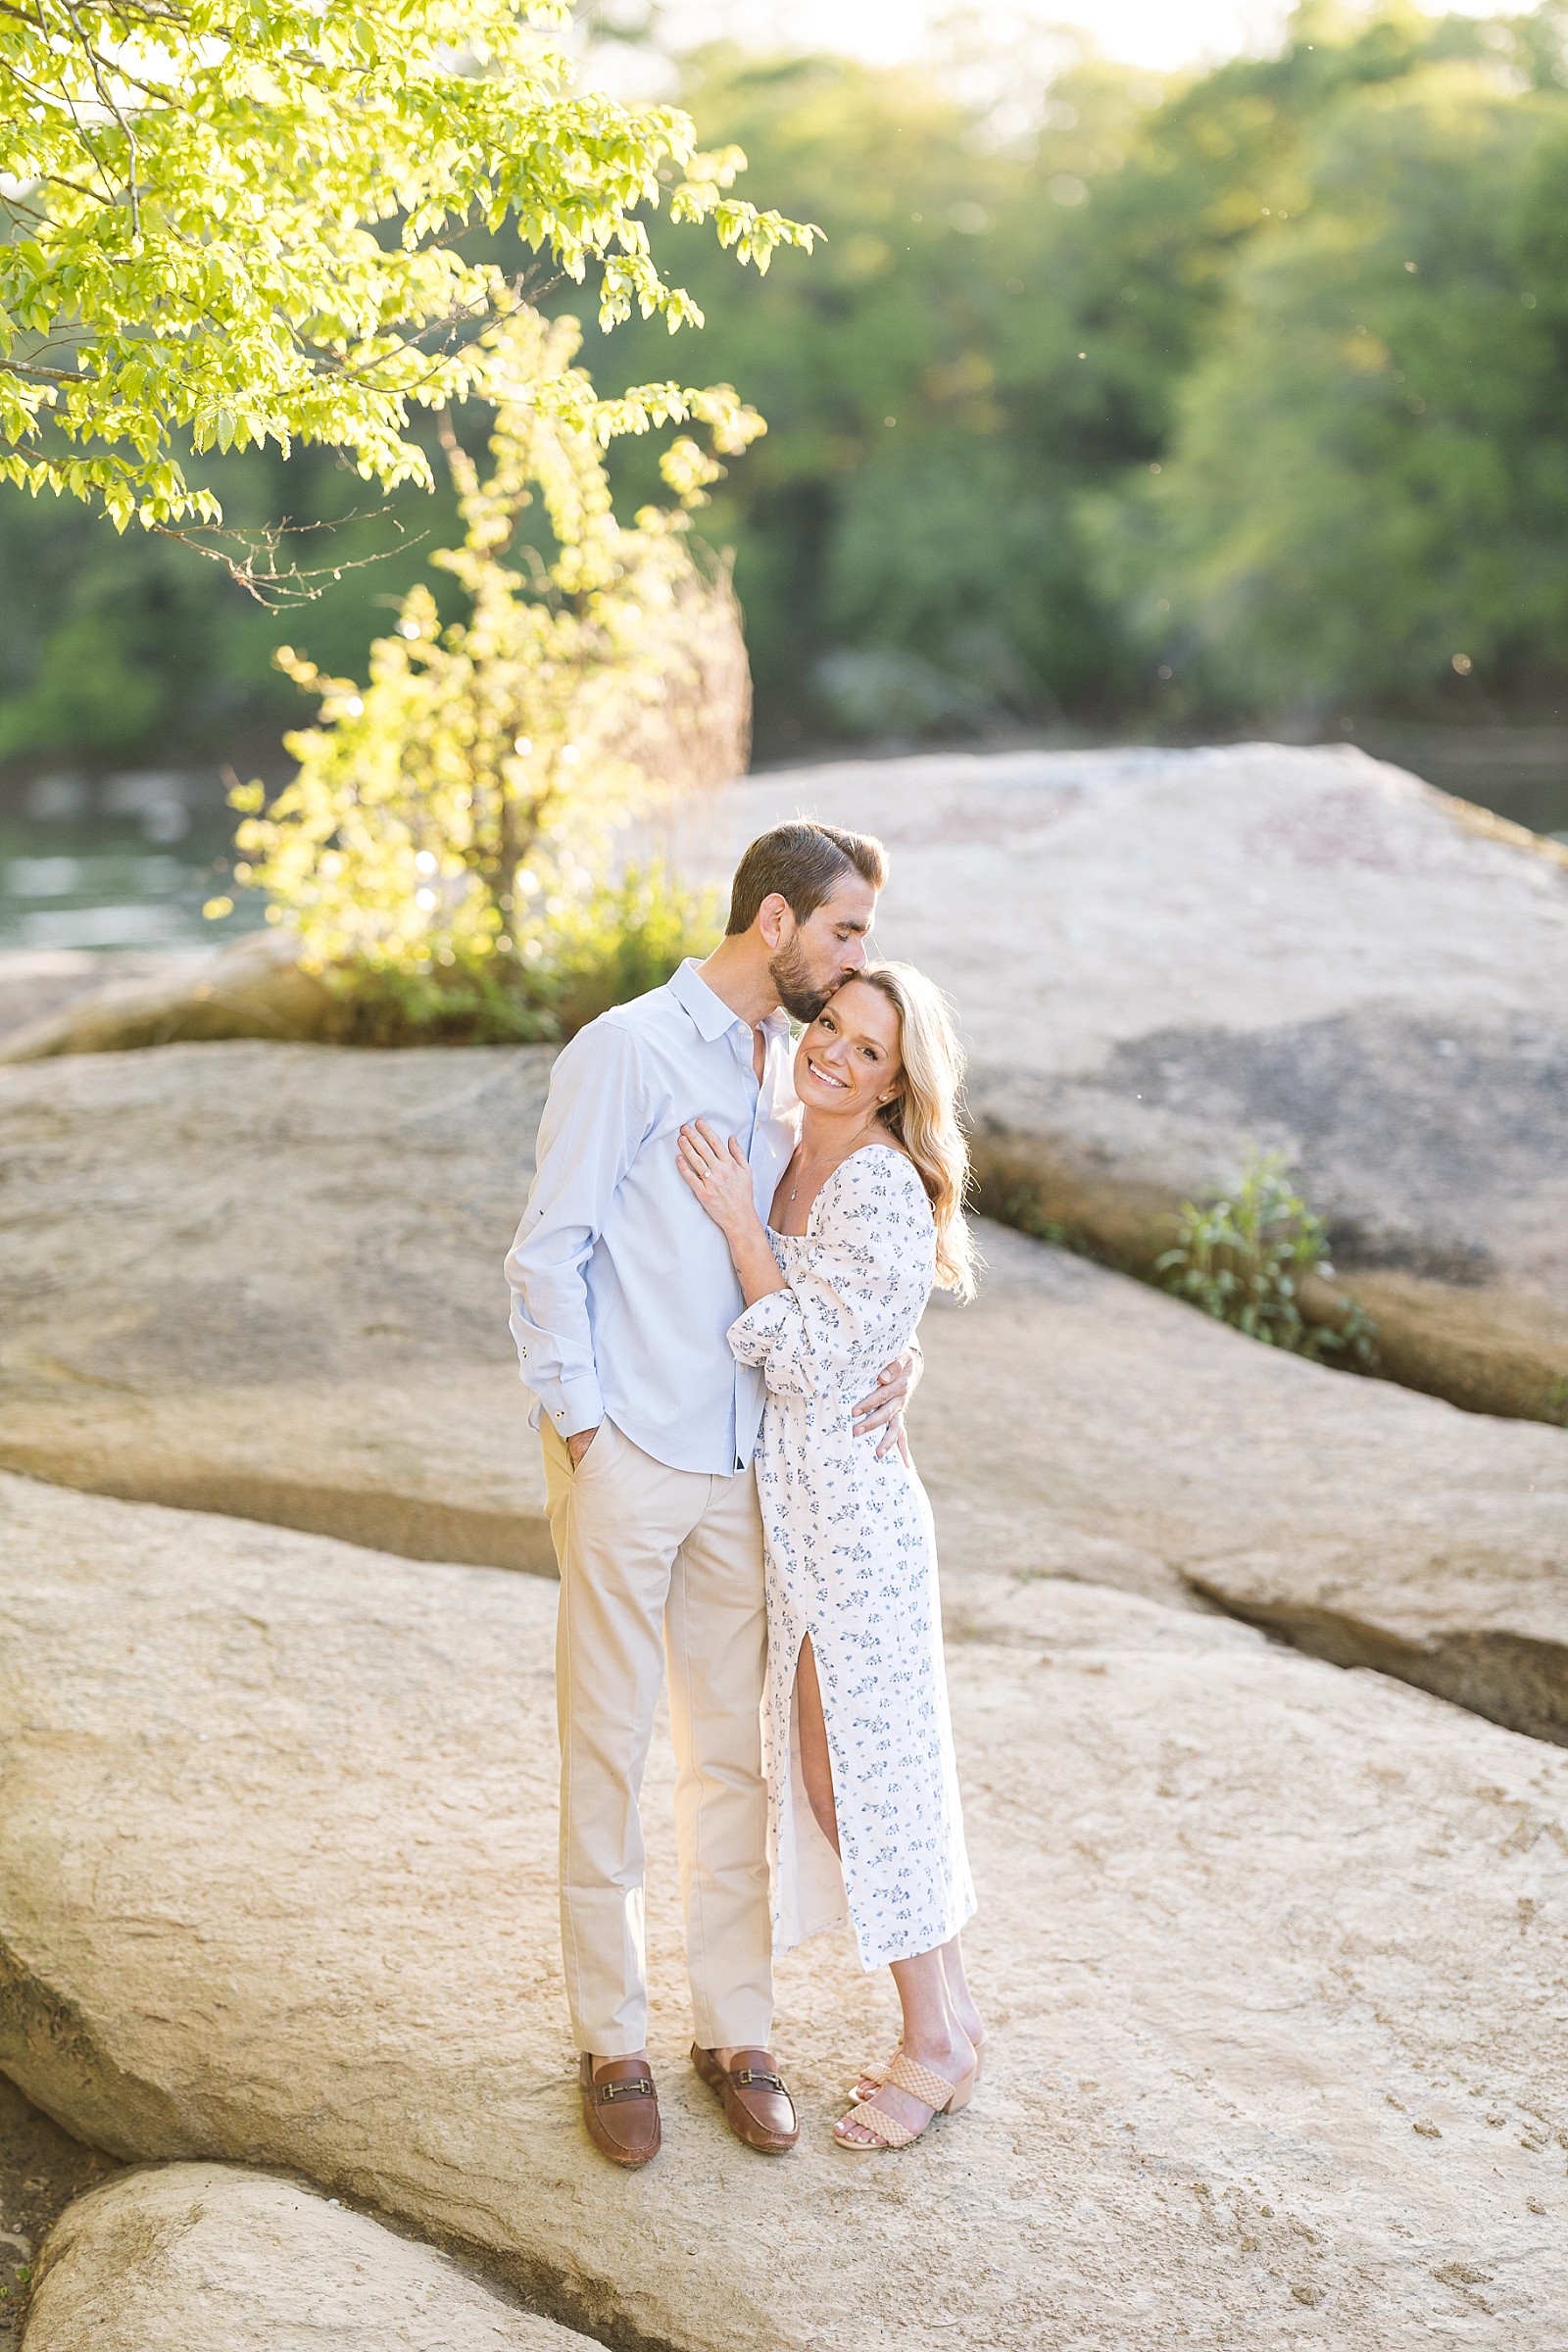 Best Places to Shop for Engagement Photo outfits 2022